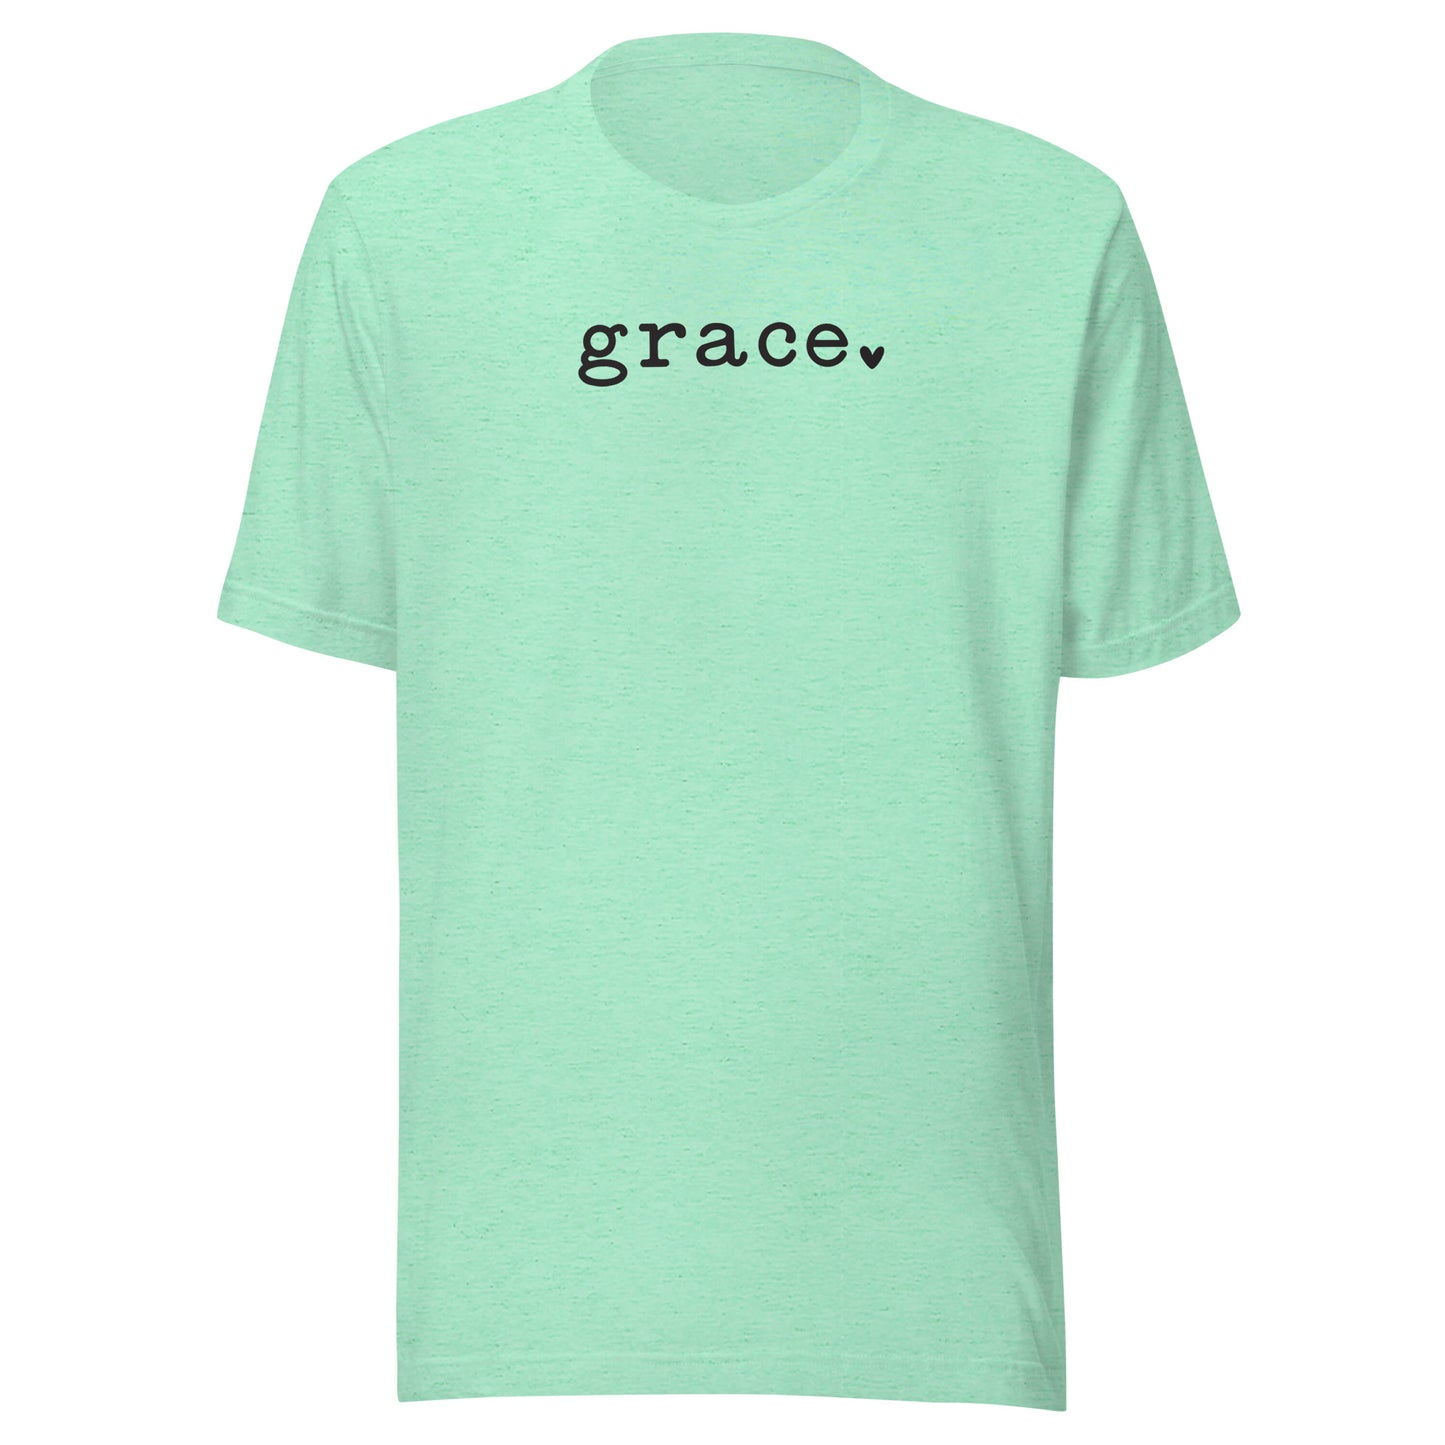 Walk in Grace and Confidence with Our Inspirational Grace T-Shirt